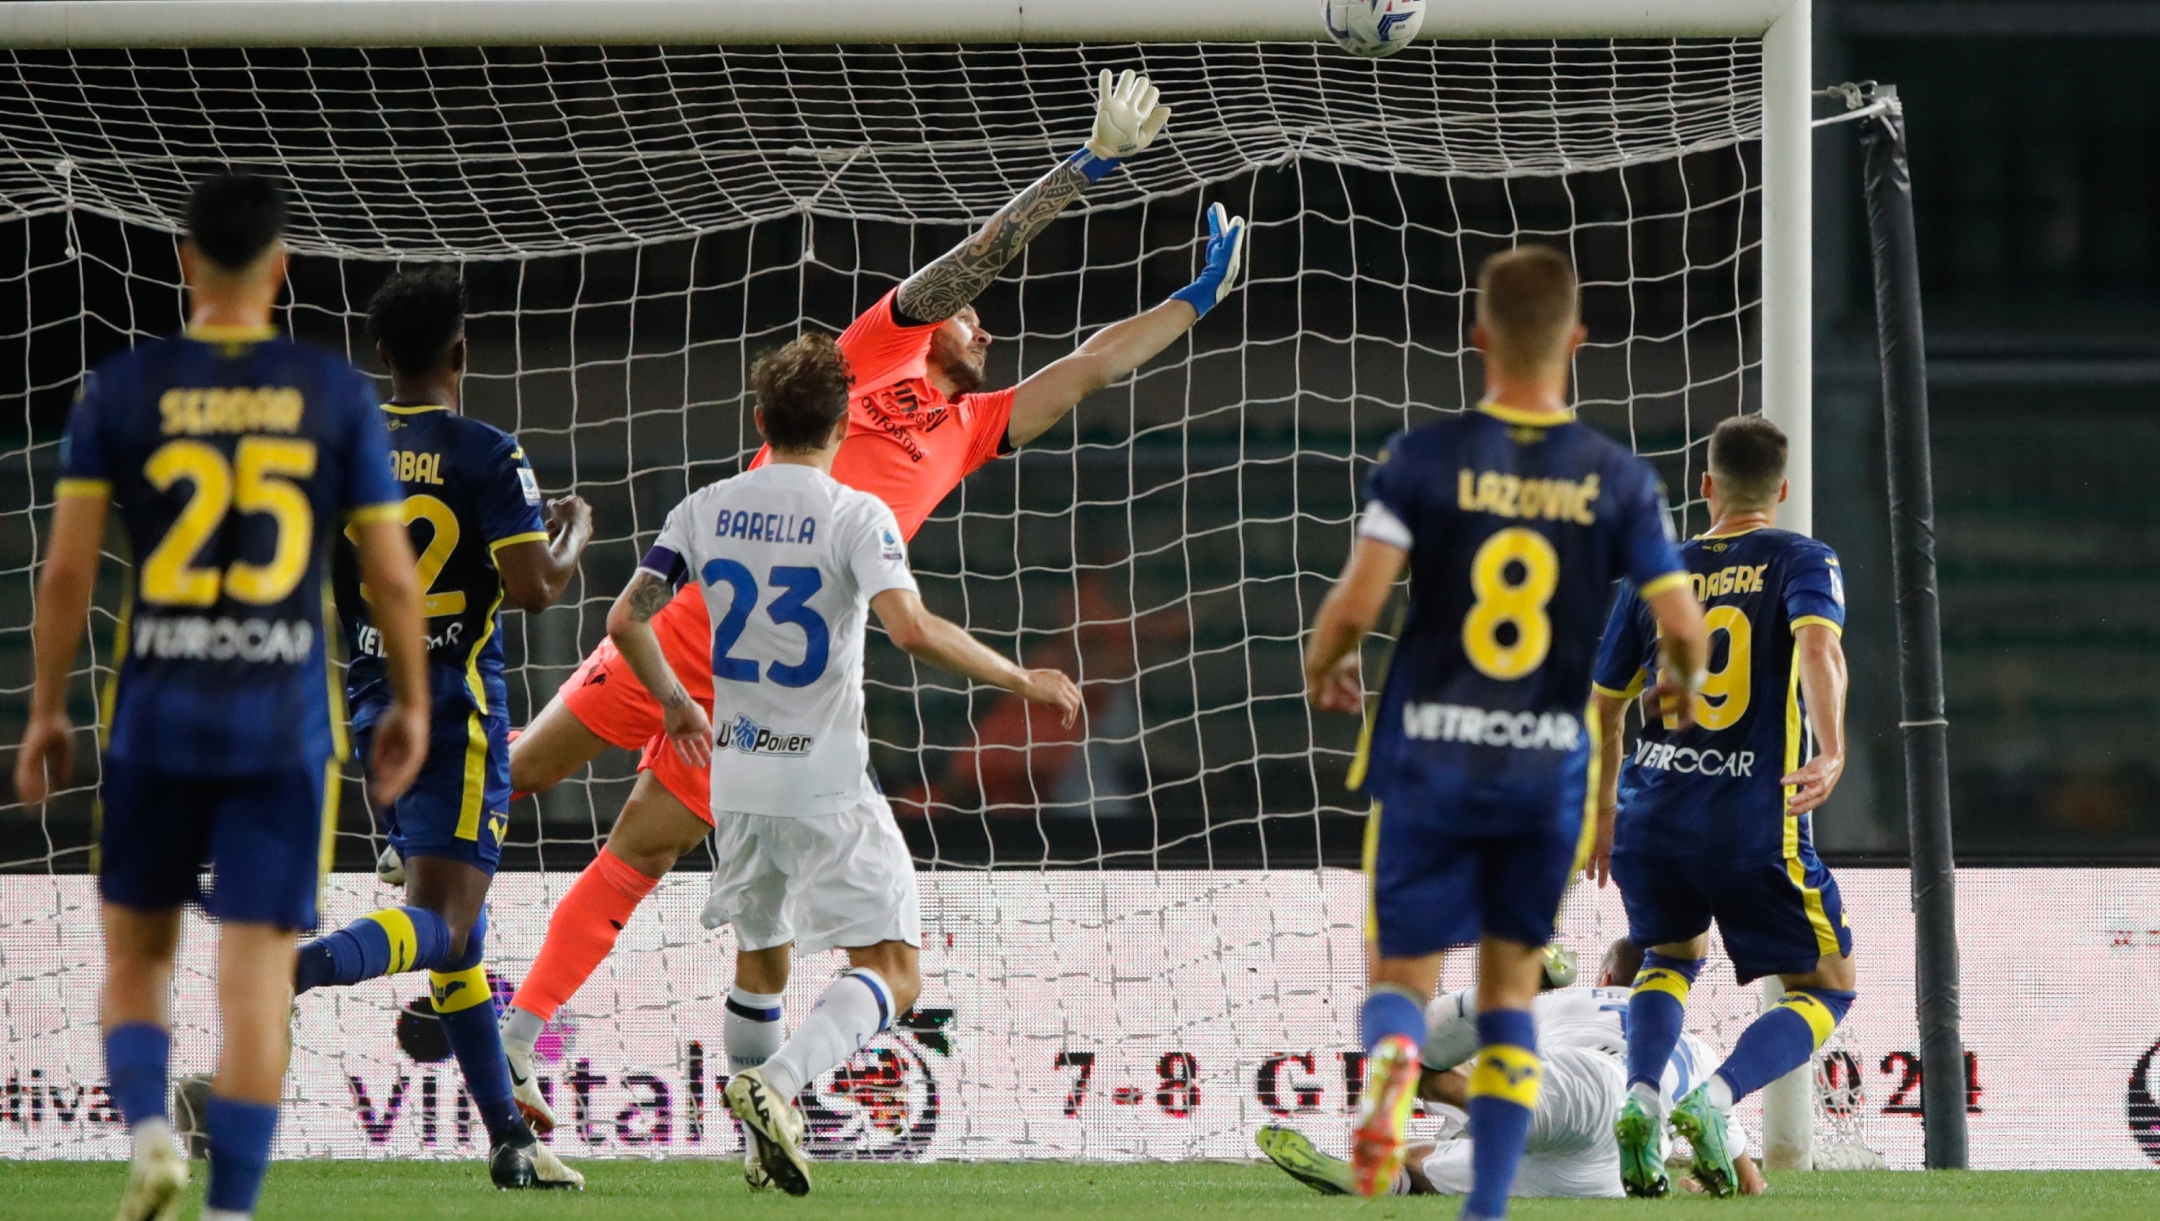 VERONA, ITALY - MAY 26: Simone Perilli of Verona makes a save during the Serie A TIM match between Hellas Verona FC and FC Internazionale at Stadio Marcantonio Bentegodi on May 26, 2024 in Verona, Italy. (Photo by Timothy Rogers/Getty Images)